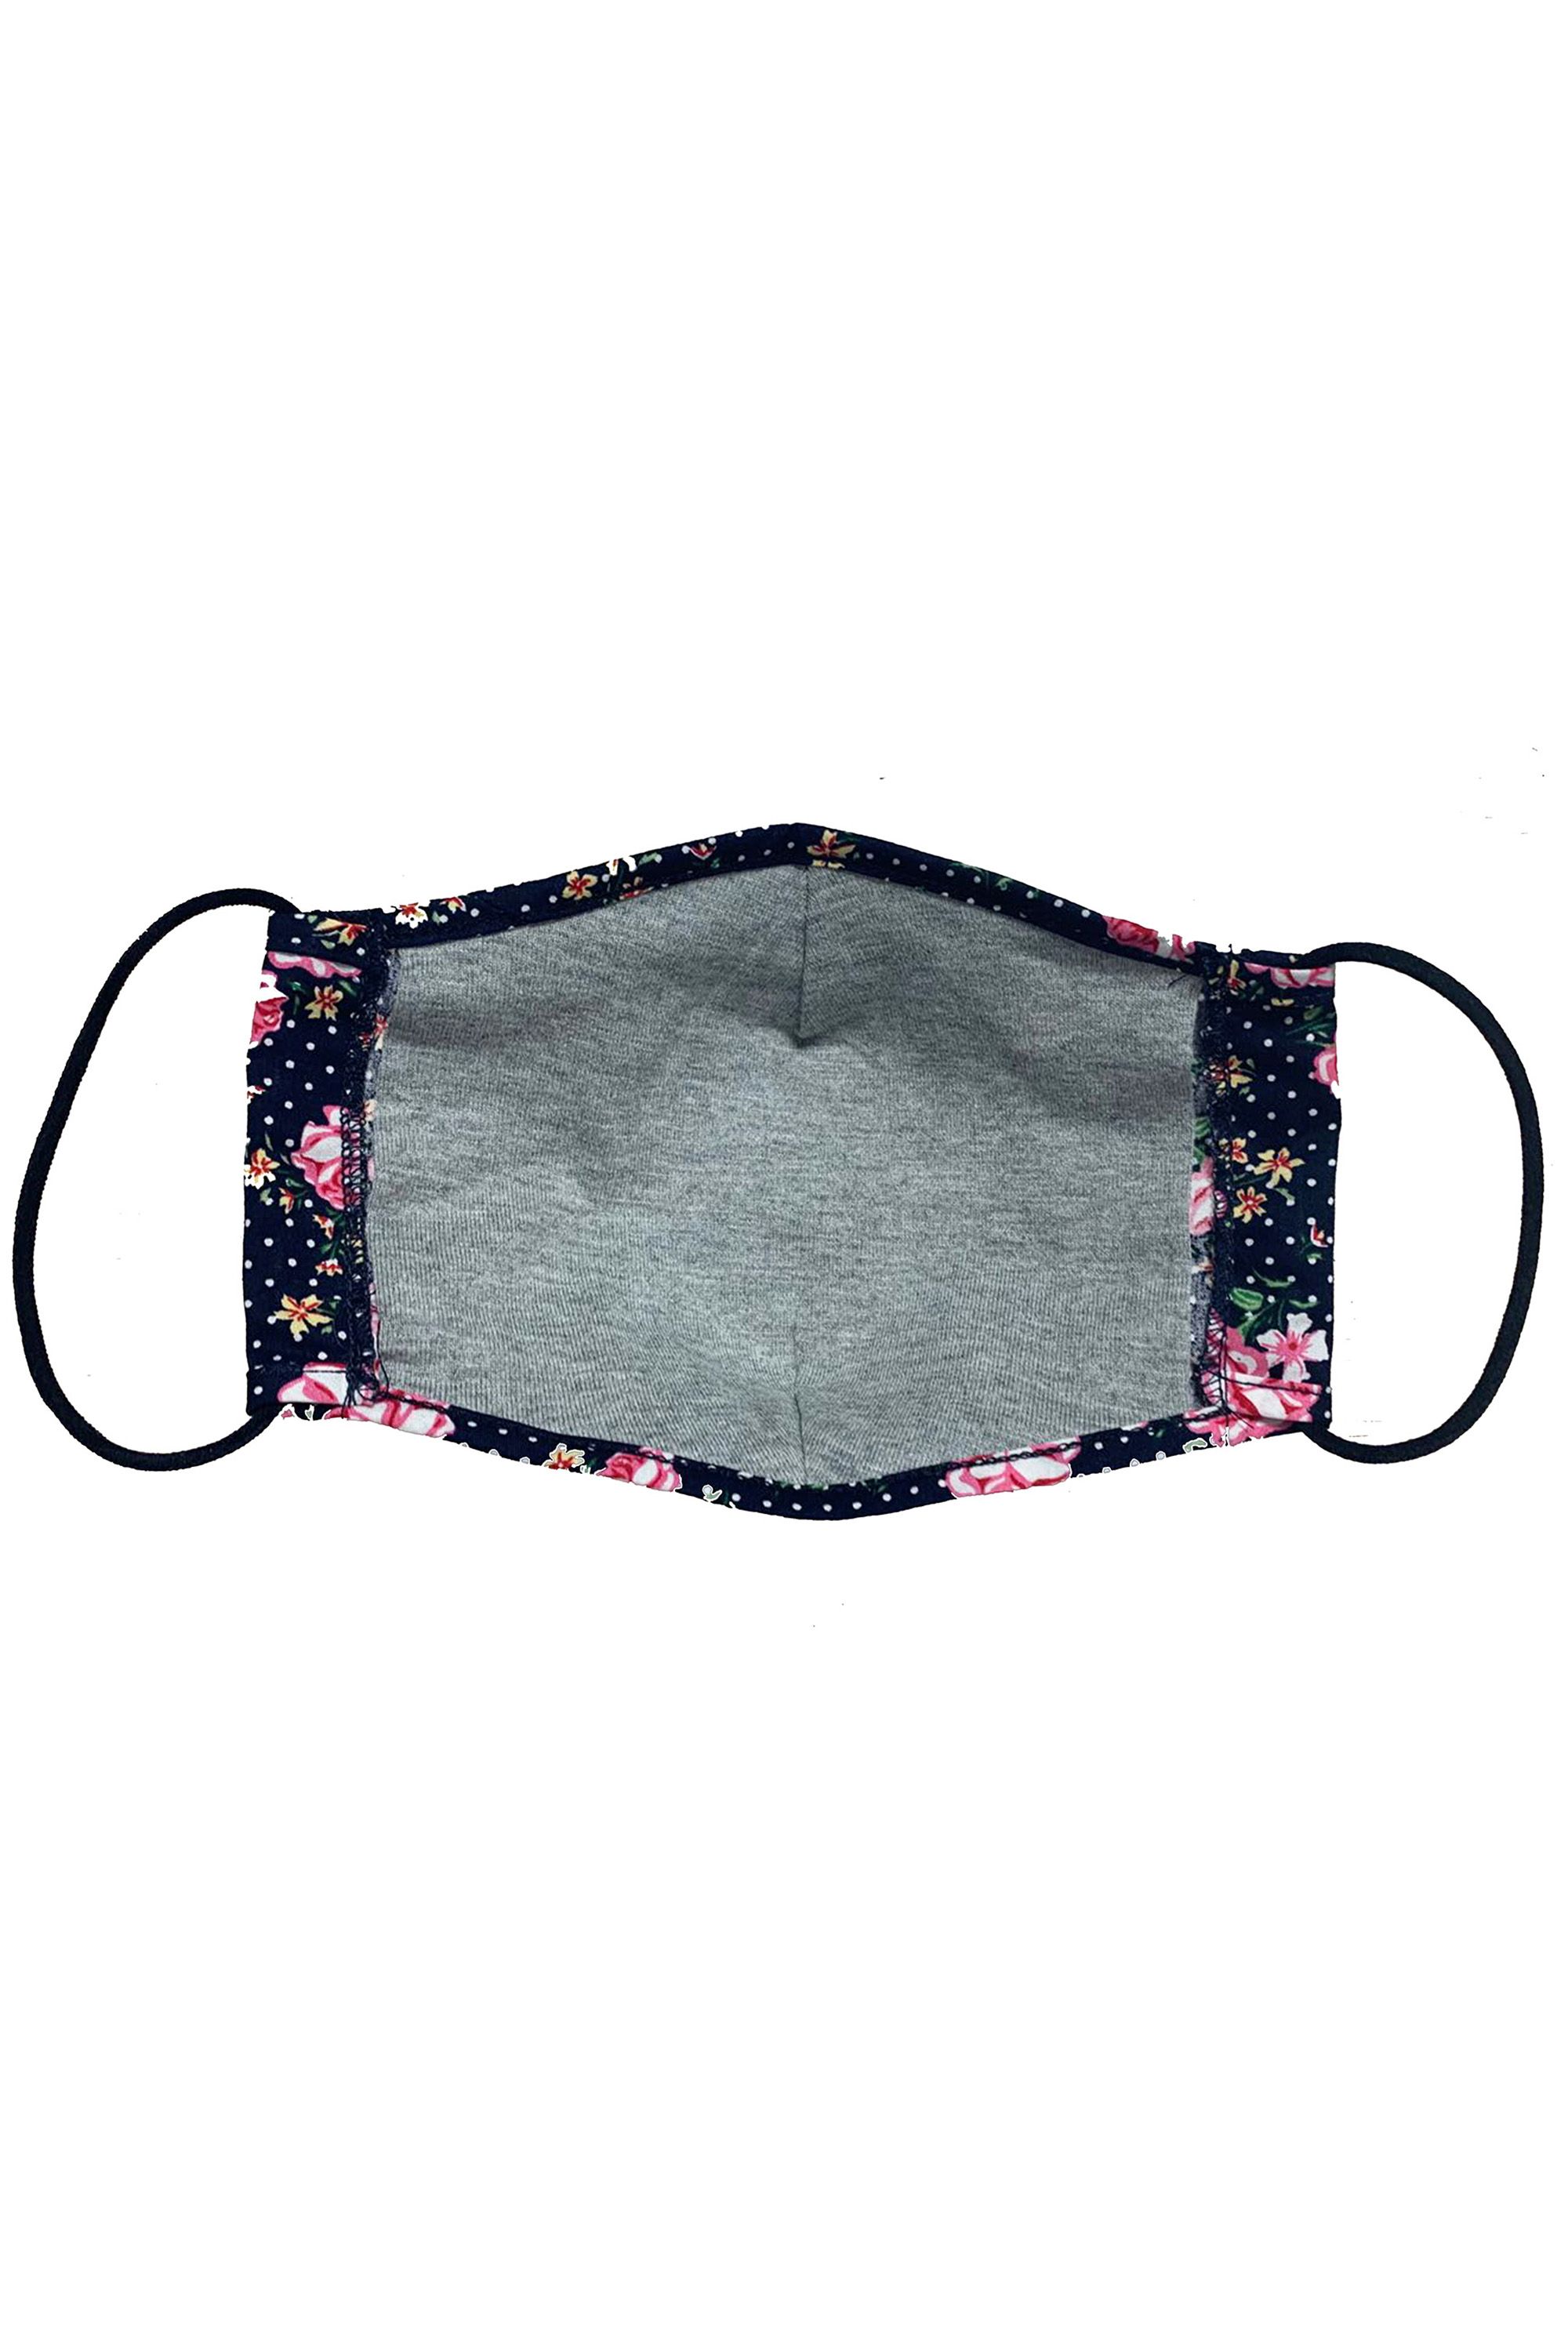 Designed with a pretty double print, this comfortable Rose Spot Face Covering is cut from soft cotton. It's made from the end of our fabric rolls, so it's sustainable and kind to the planet.Please remember it is a non-medical mask and not PPE. Wash your hands before and after putting on the covering. One Poundfrom each covering is donated to Sufra, a charity that supports and provides food for people in extreme poverty.  100% Cotton, Lining:100% Cotton